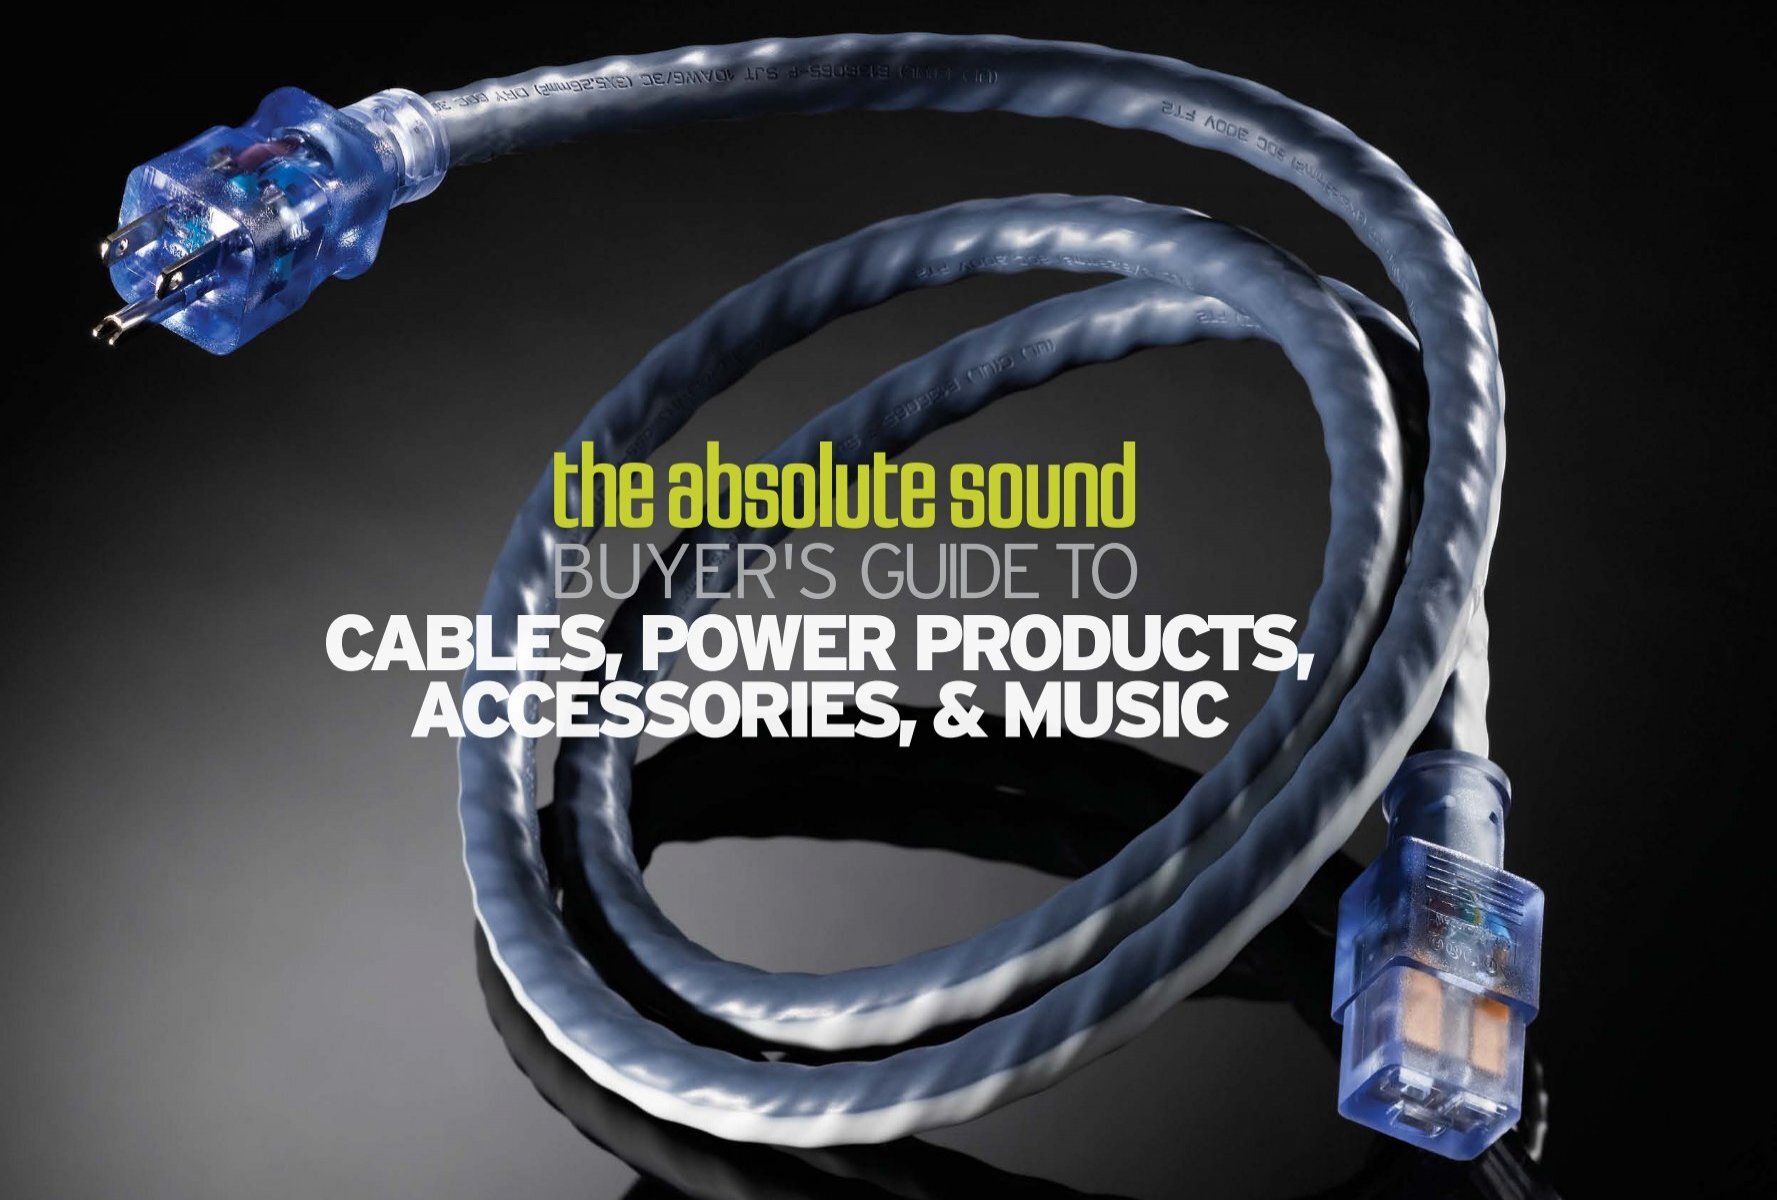 Cables, Power Products, Accessories, & Music